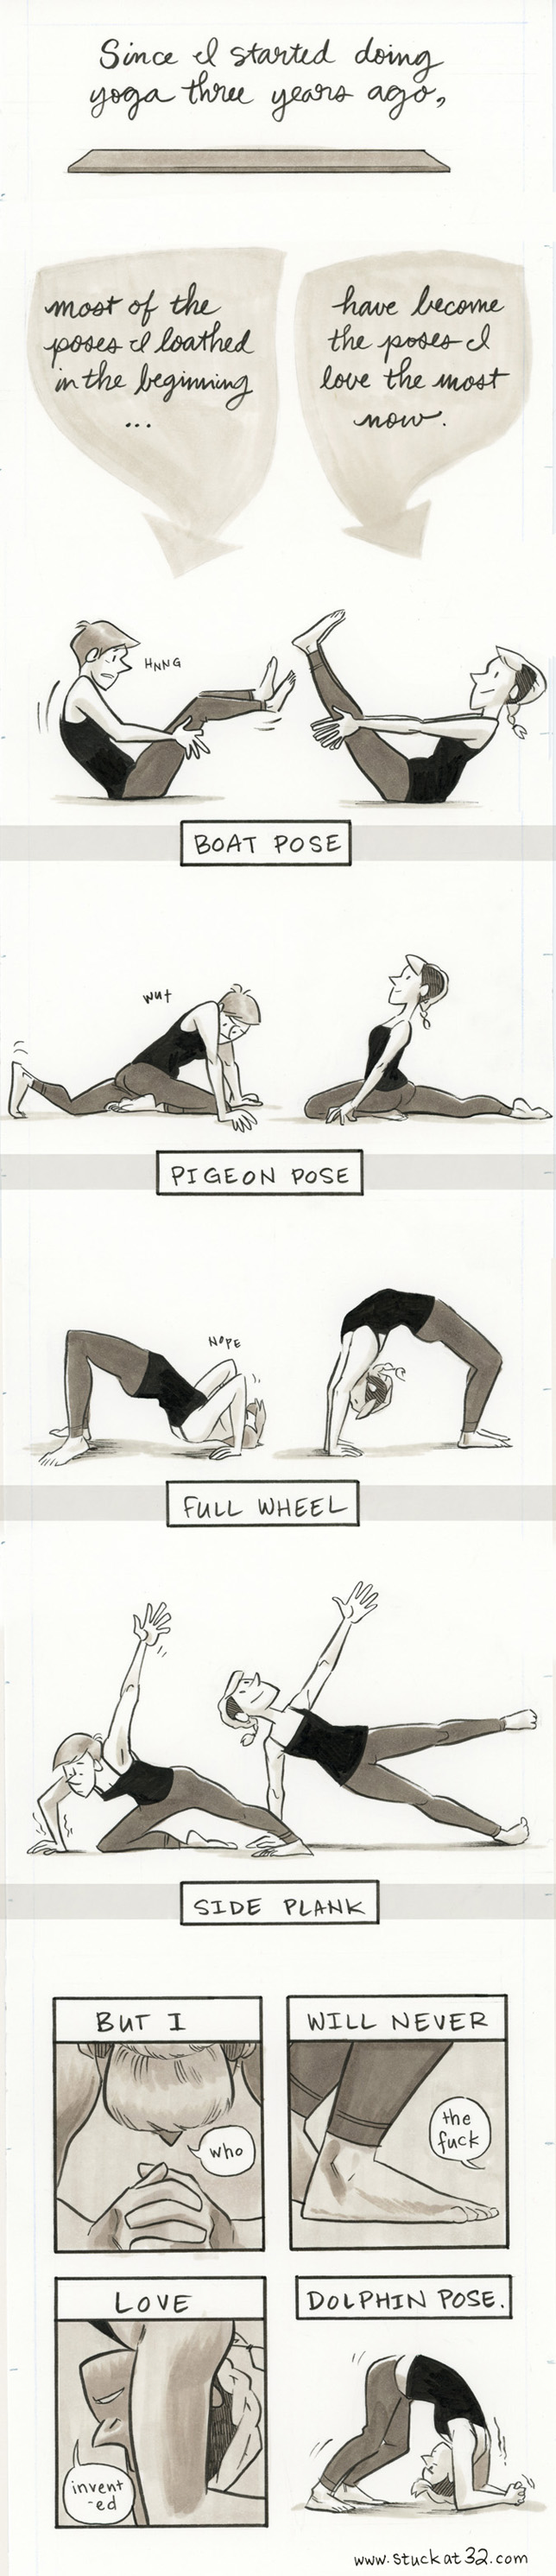 Yoga pose of the day - I Has A Hotdog - Dog Pictures - Funny pictures of  dogs - Dog Memes - Puppy pictures - doge